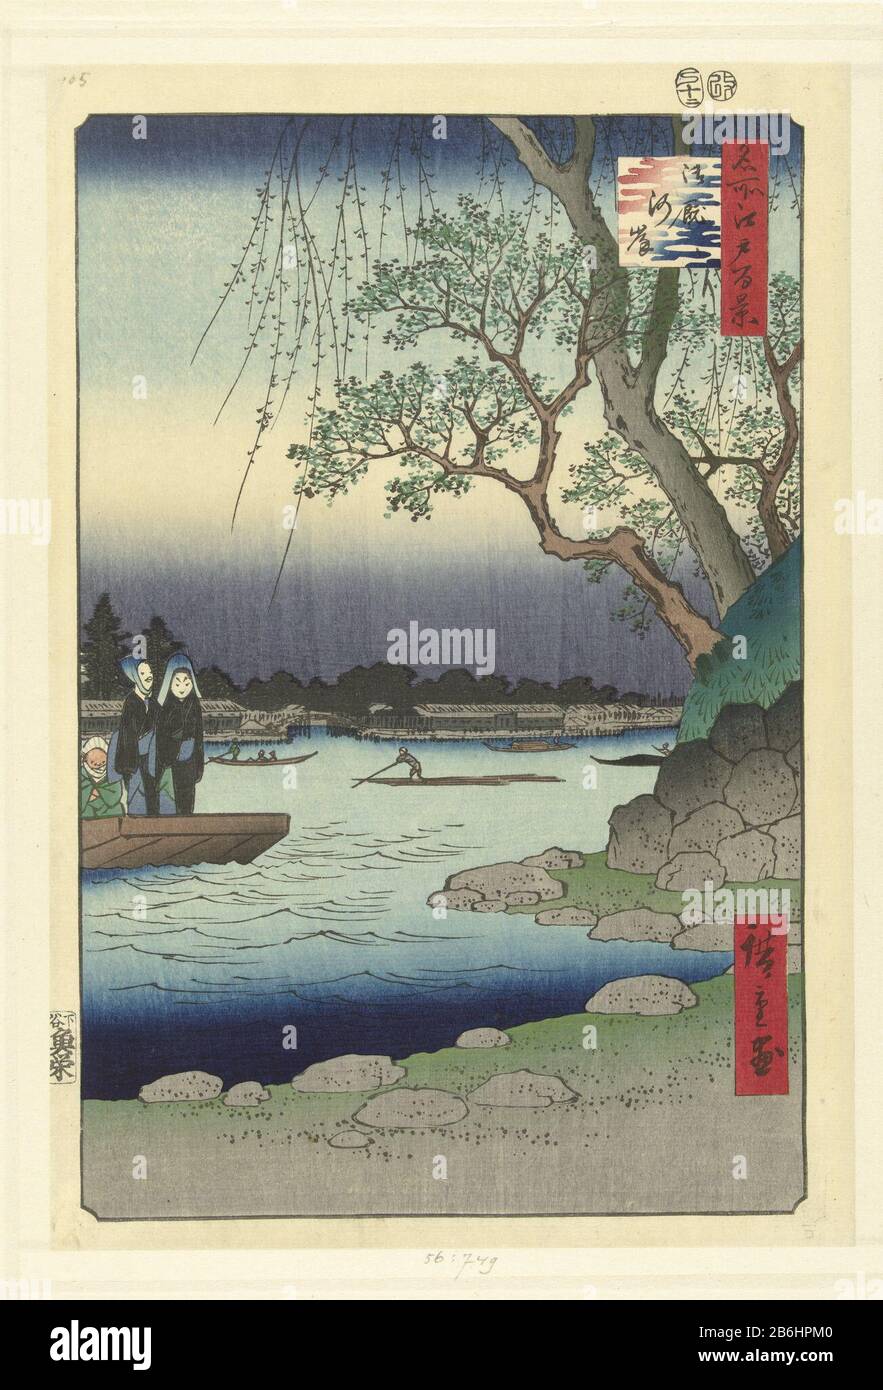 The bank Onmaya Onmayagashi (title object) One hundred famous views of Edo (series title) meisho Edo Hyakkei (series title object) The Sumida river seen from the shore Onmaya; the ferry links two prostitutes, the lowest class, working on rivieroevers. Manufacturer : printmaker: Hiroshige (I), Utagawa (listed building) publisher: Uoya Eikichi (listed property) Place manufacture: Japan Date: 1857 Physical characteristics: color woodblock ; line block in black with color blocks and dosa (aluminum powder) Material: Aluminum paper Technique: Nishiki-e / color woodcut dimensions: sheet: H 347 mm × W Stock Photo